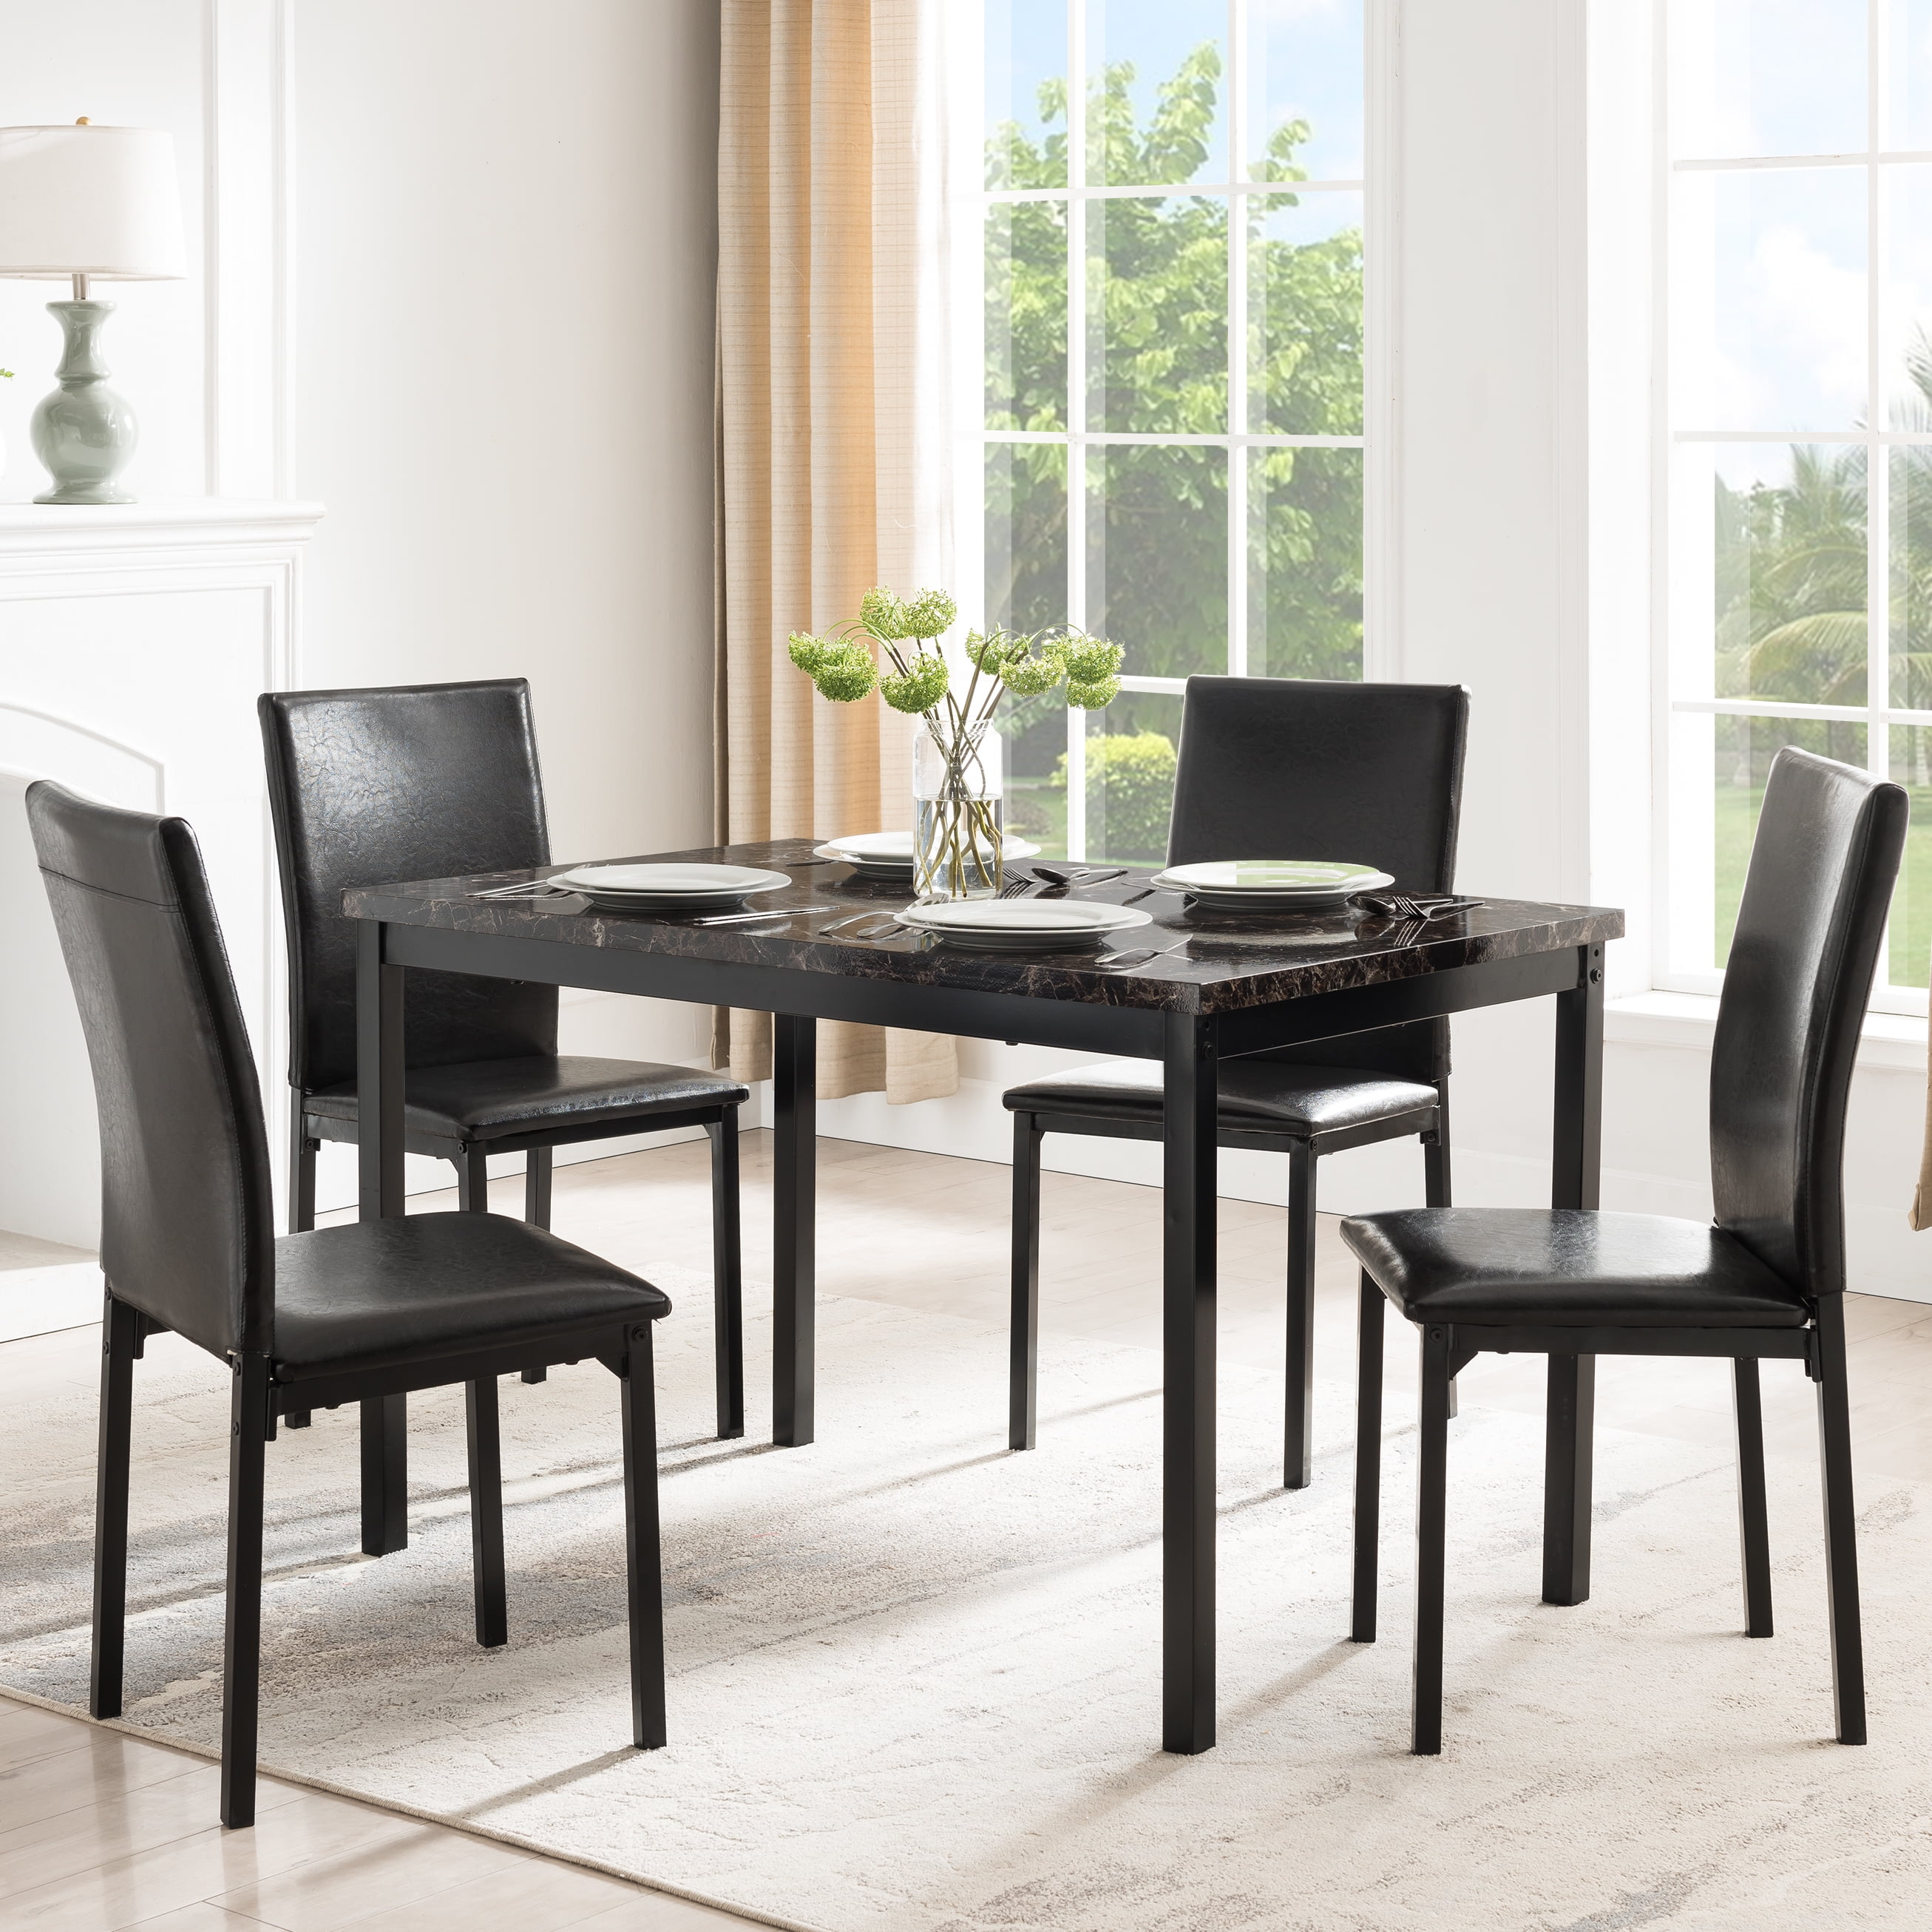 5 Piece Dining Set Faux Marble Table Top & PU 4 Black Chairs Living Room Kitchen 